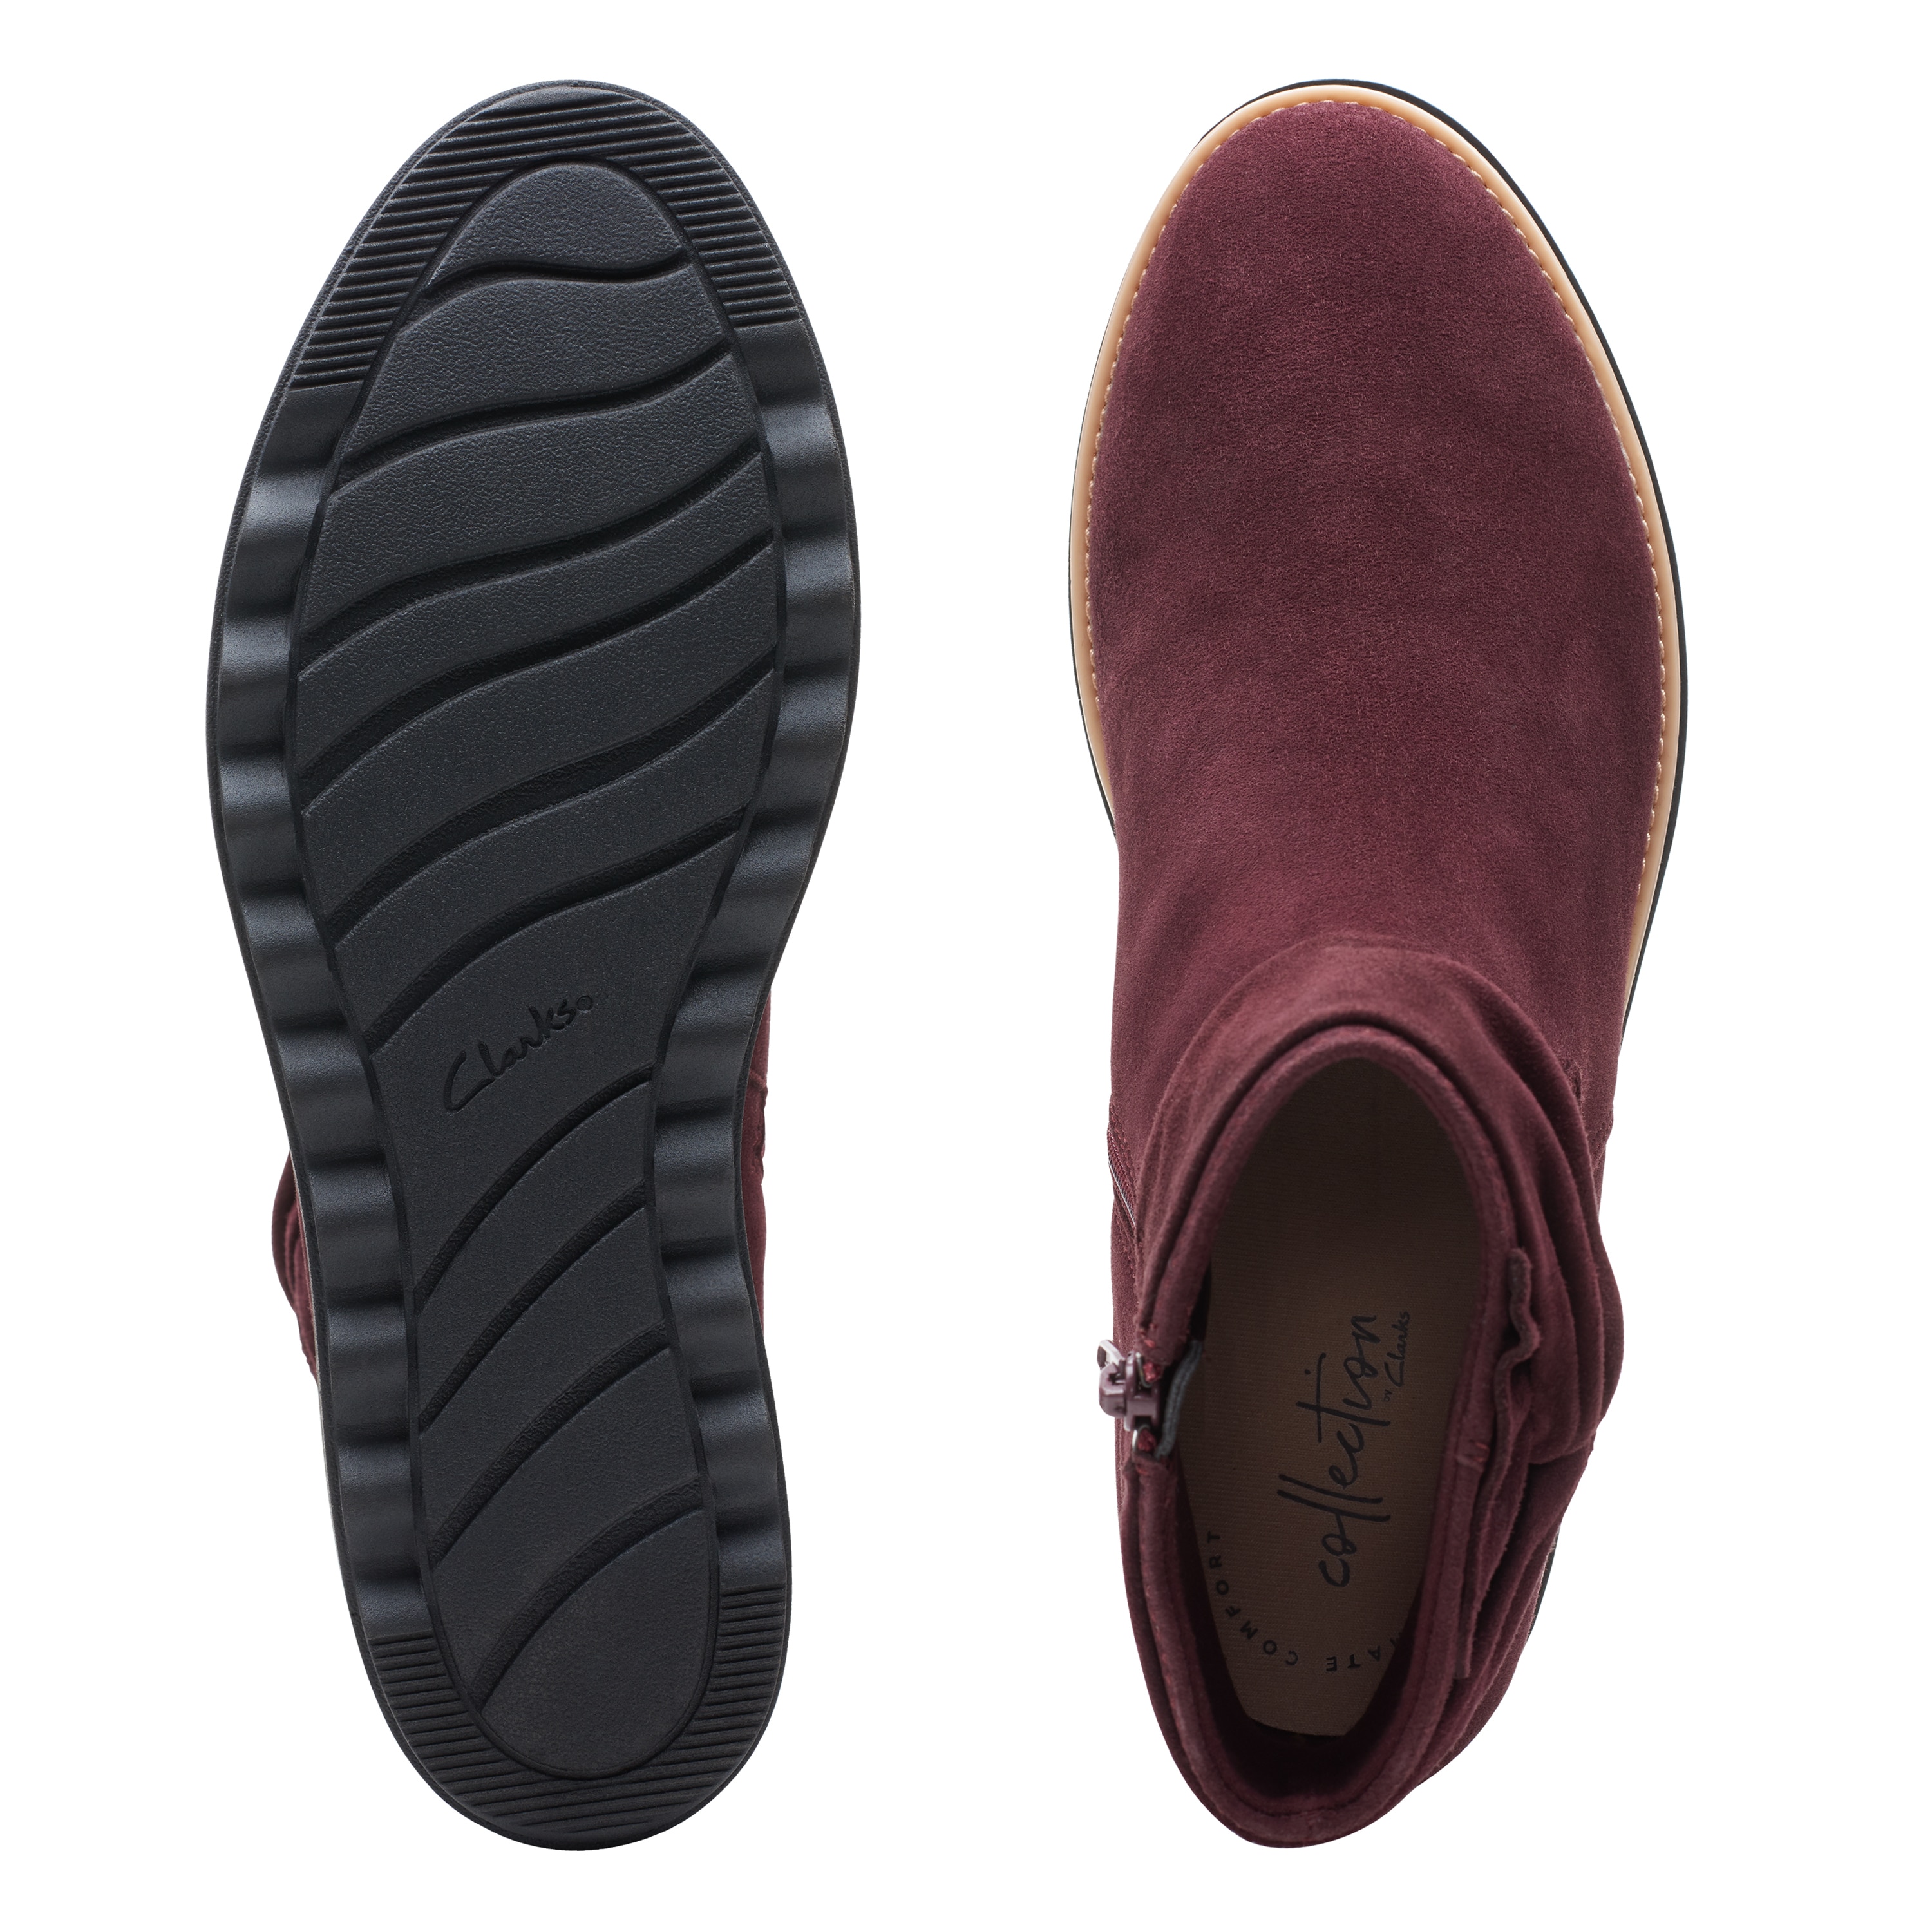 clarks shoes mississauga Off 63% - www 